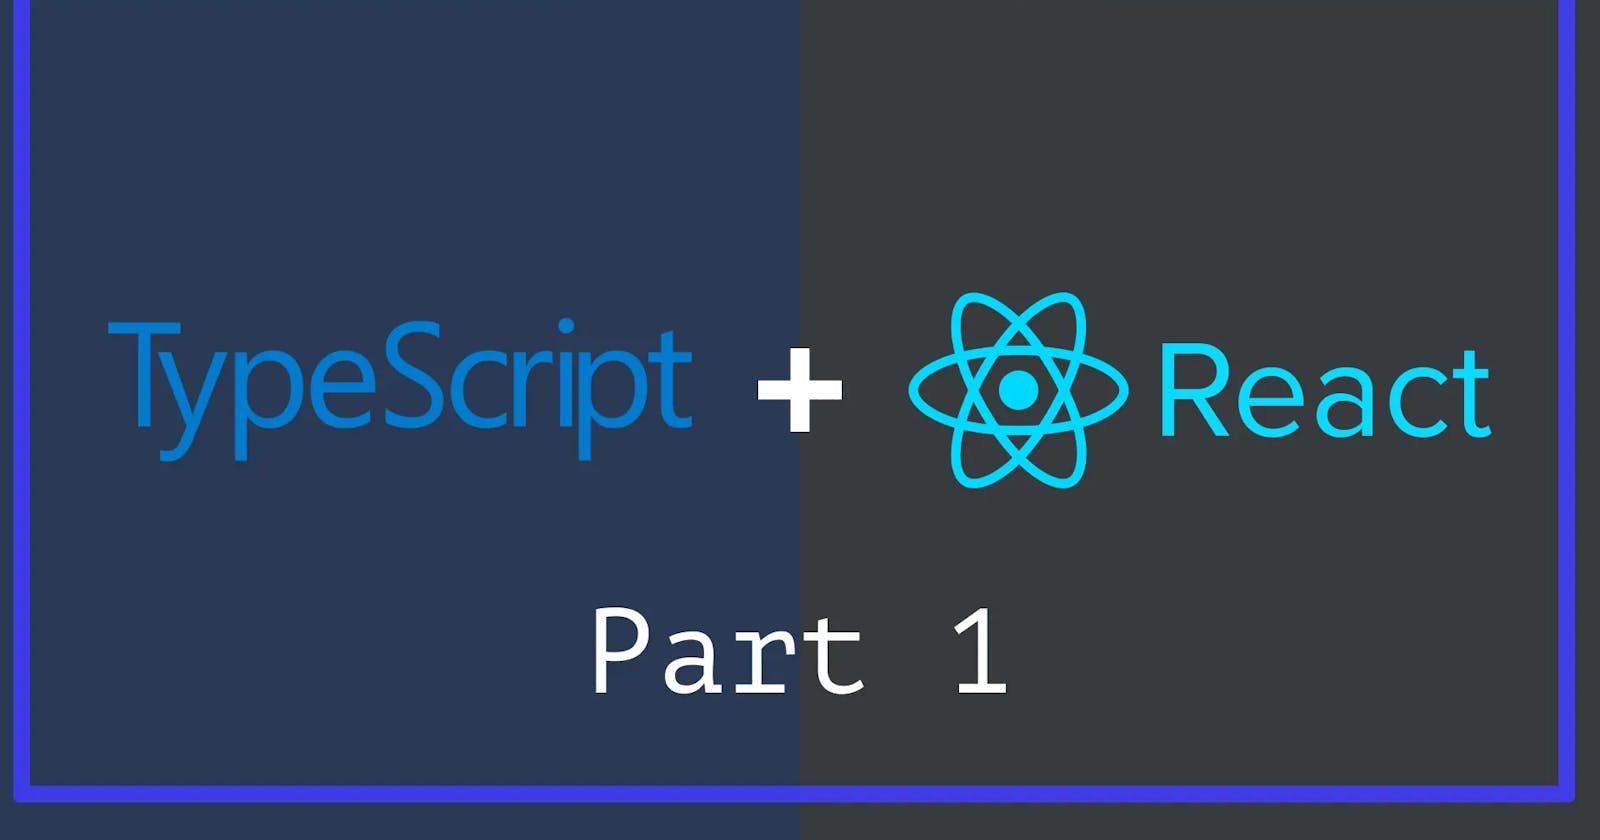 Here's what every React Developer needs to know about TypeScript - Part 1